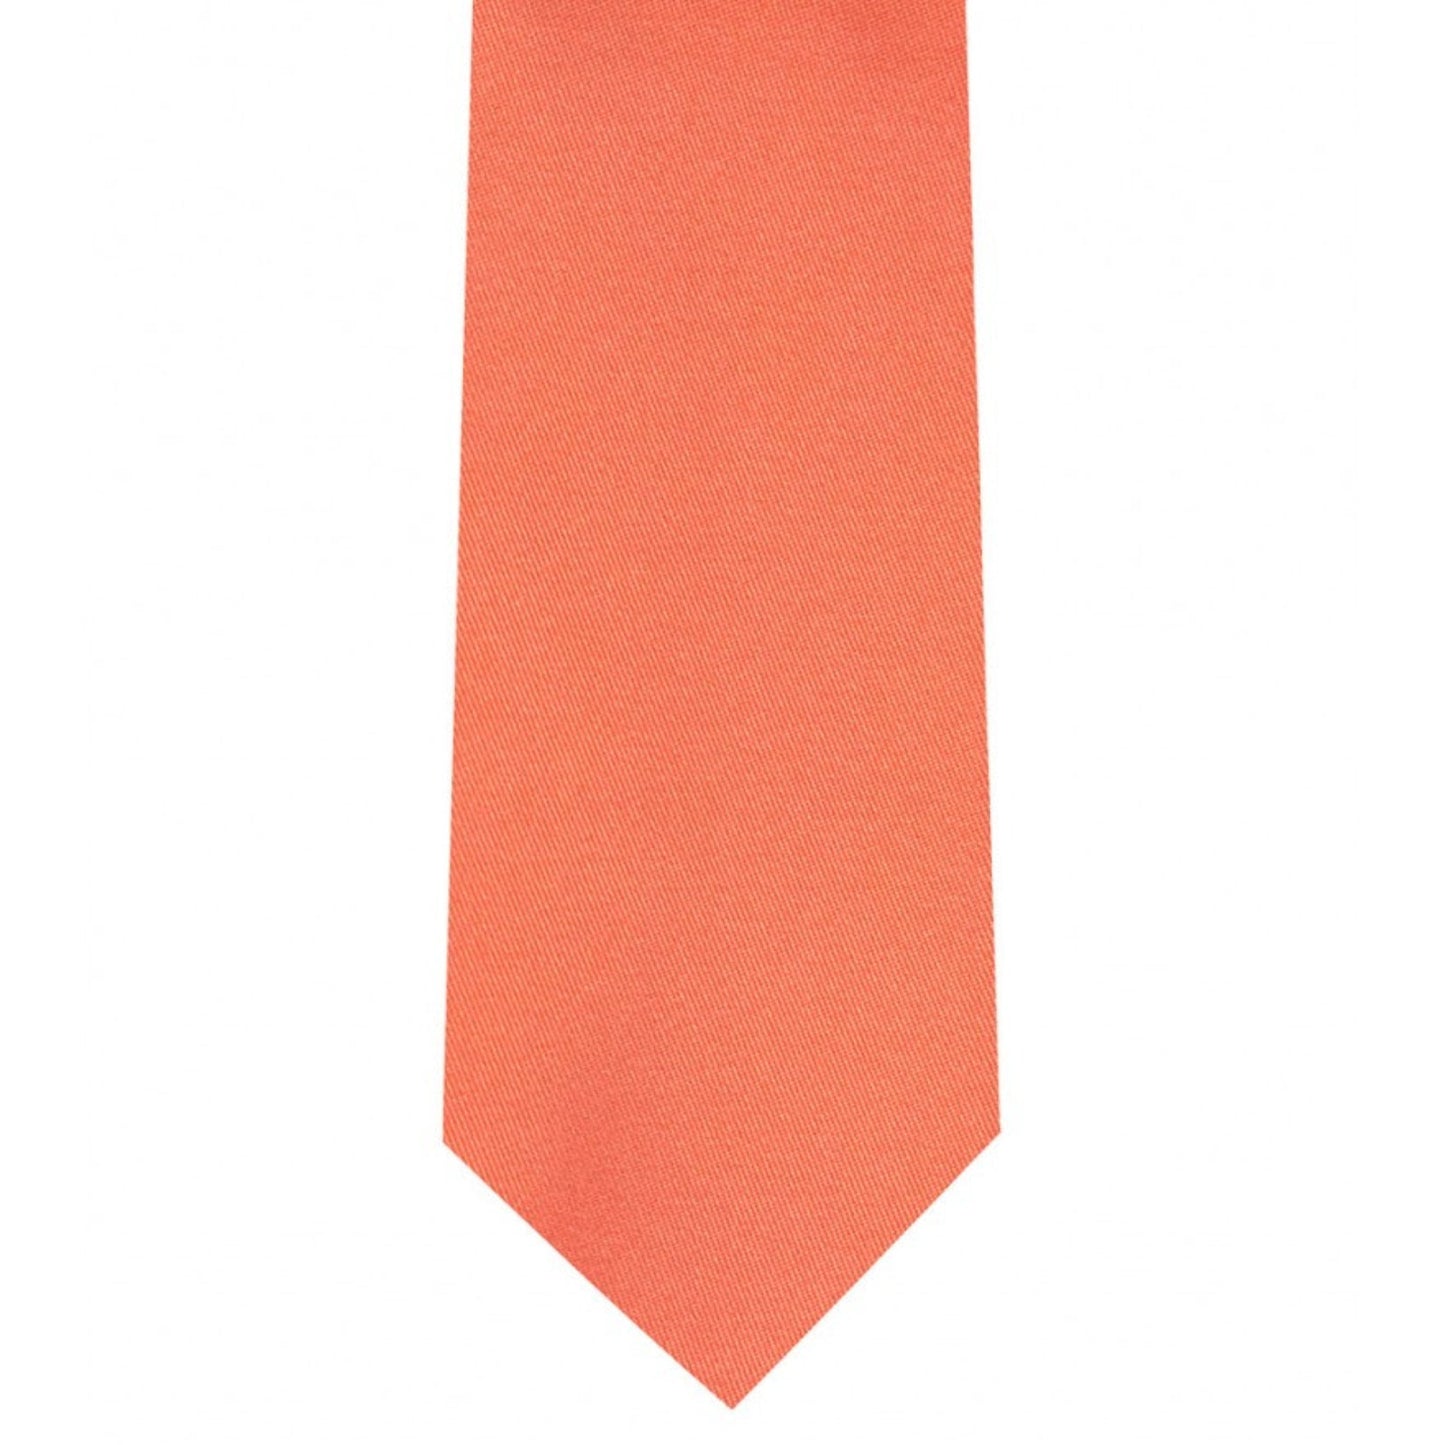 Classic Coral Tie Ultra Skinny tie width 2.25 inches With Matching Pocket Square | KCT Menswear